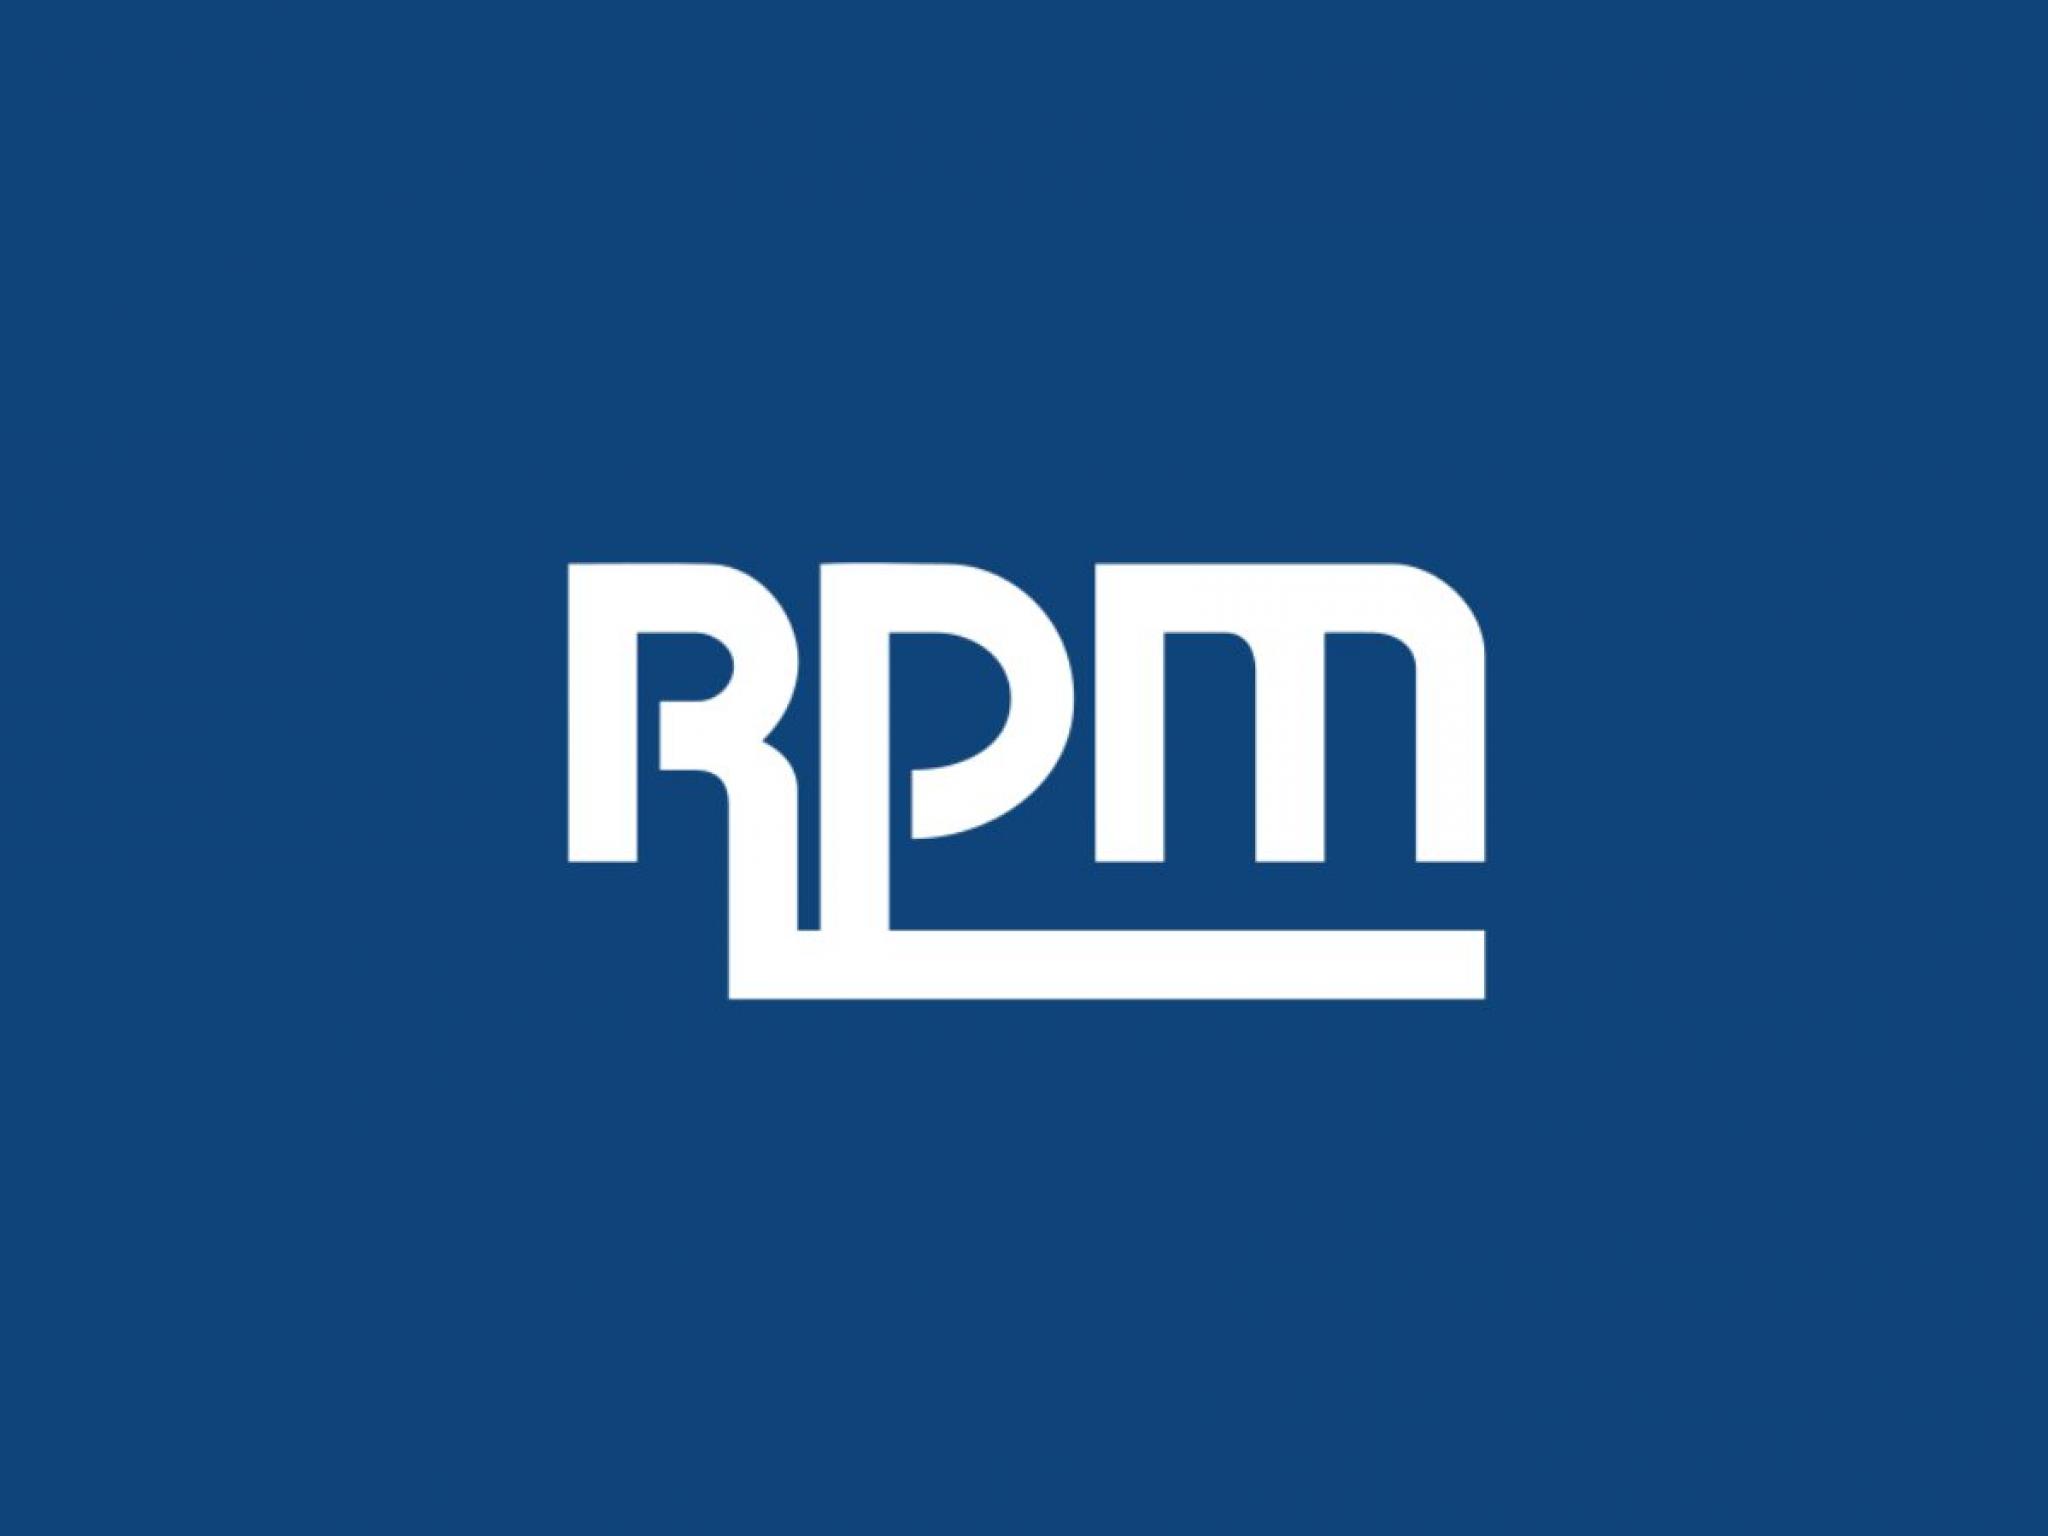  rpm-international-analysts-boost-their-forecasts-after-q3-earnings 